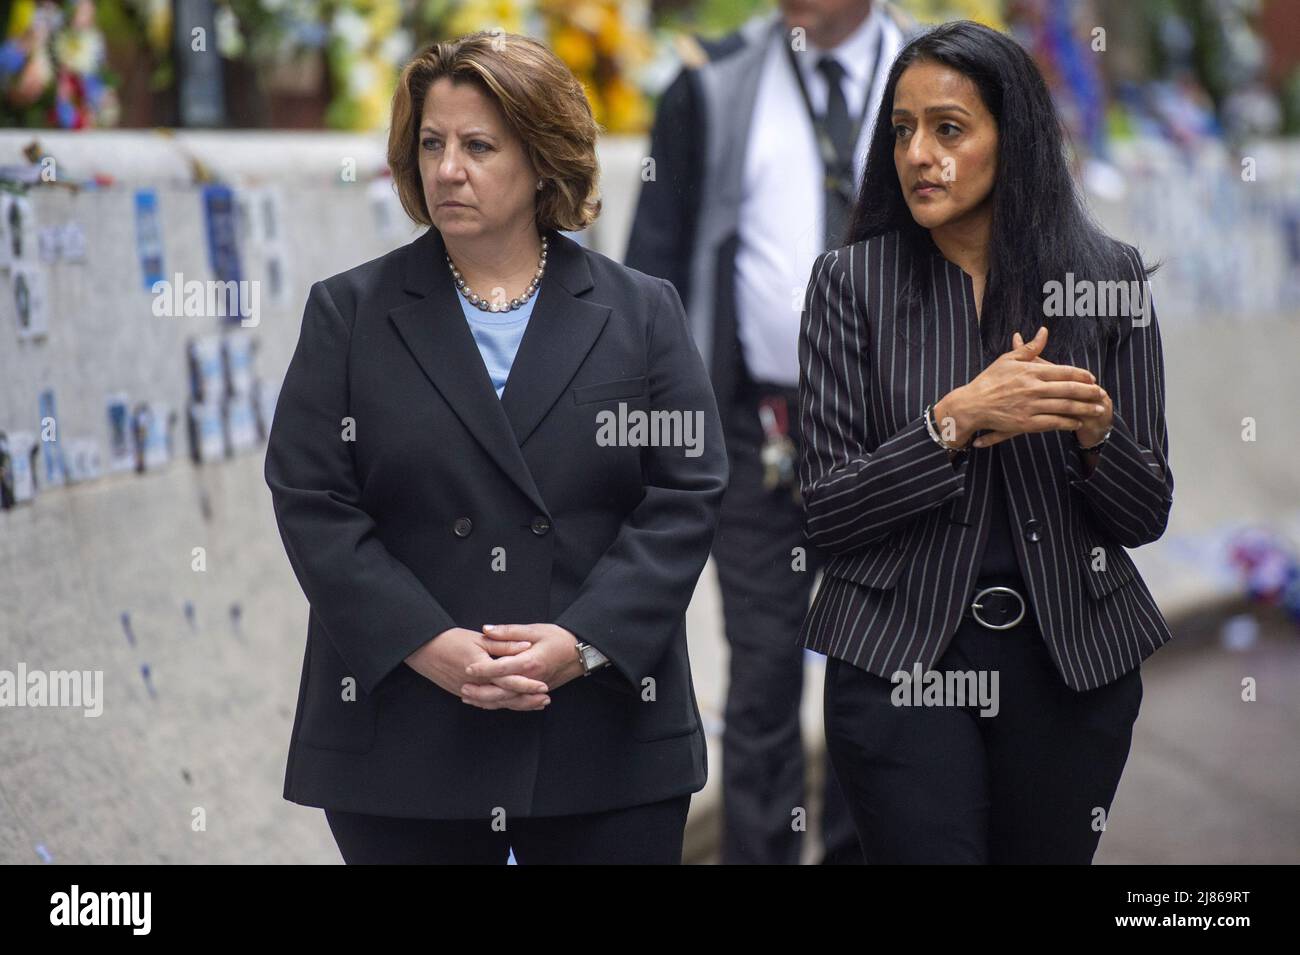 Washington, United States. 13th May, 2022. Deputy Attorney General Lisa Monaco and Associate Attorney General Vanita Gupta (L-R) walk through the .National Law Enforcement Officers Memorial in honor of National Police Week in Washington, DC on Friday, May 13, 2022. Photo by Bonnie Cash/UPI Credit: UPI/Alamy Live News Stock Photo